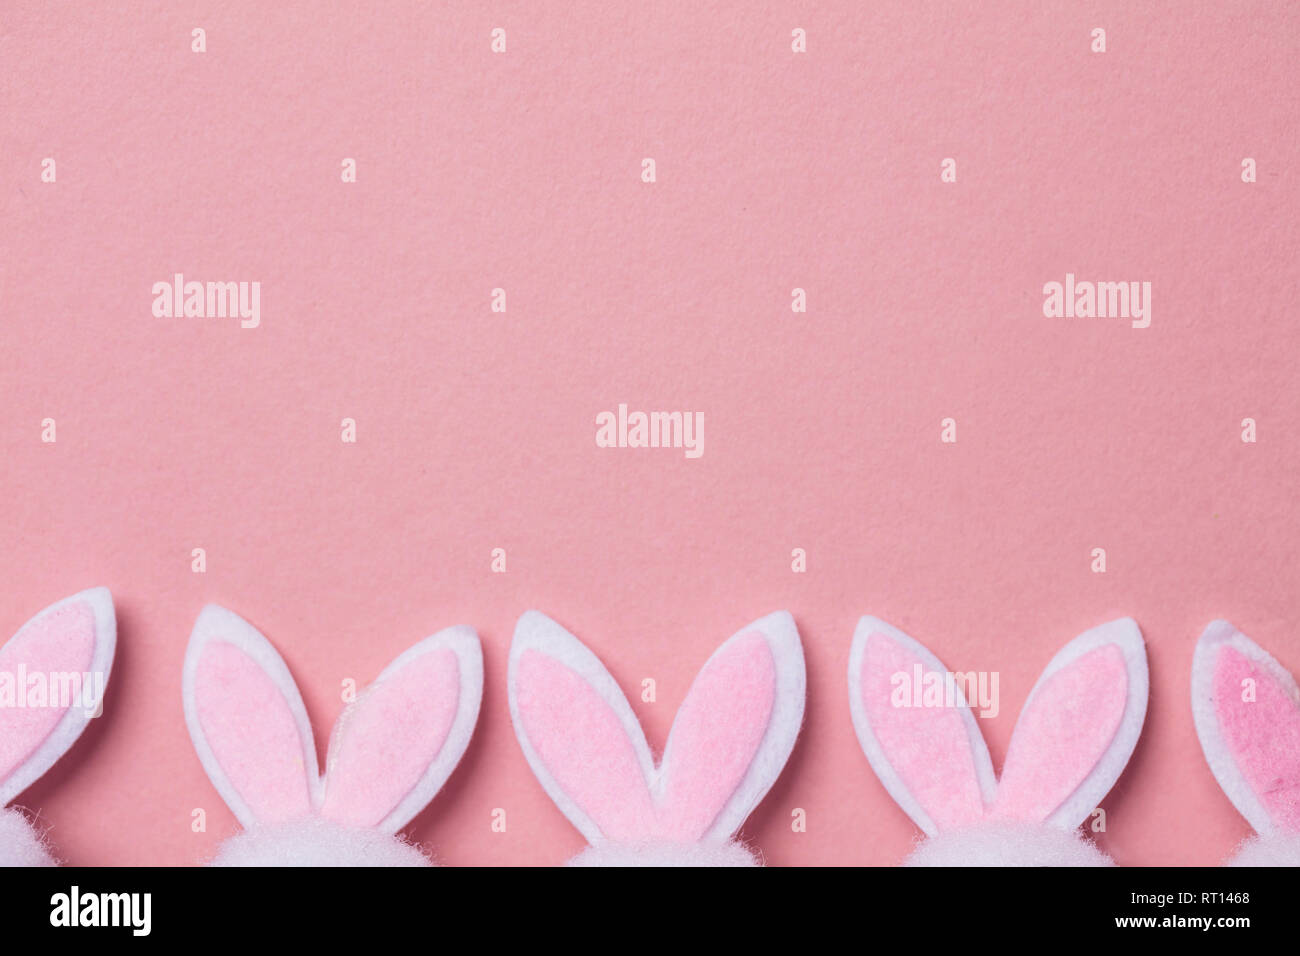 Bunny rabbit ears on a pastel pink background Stock Photo